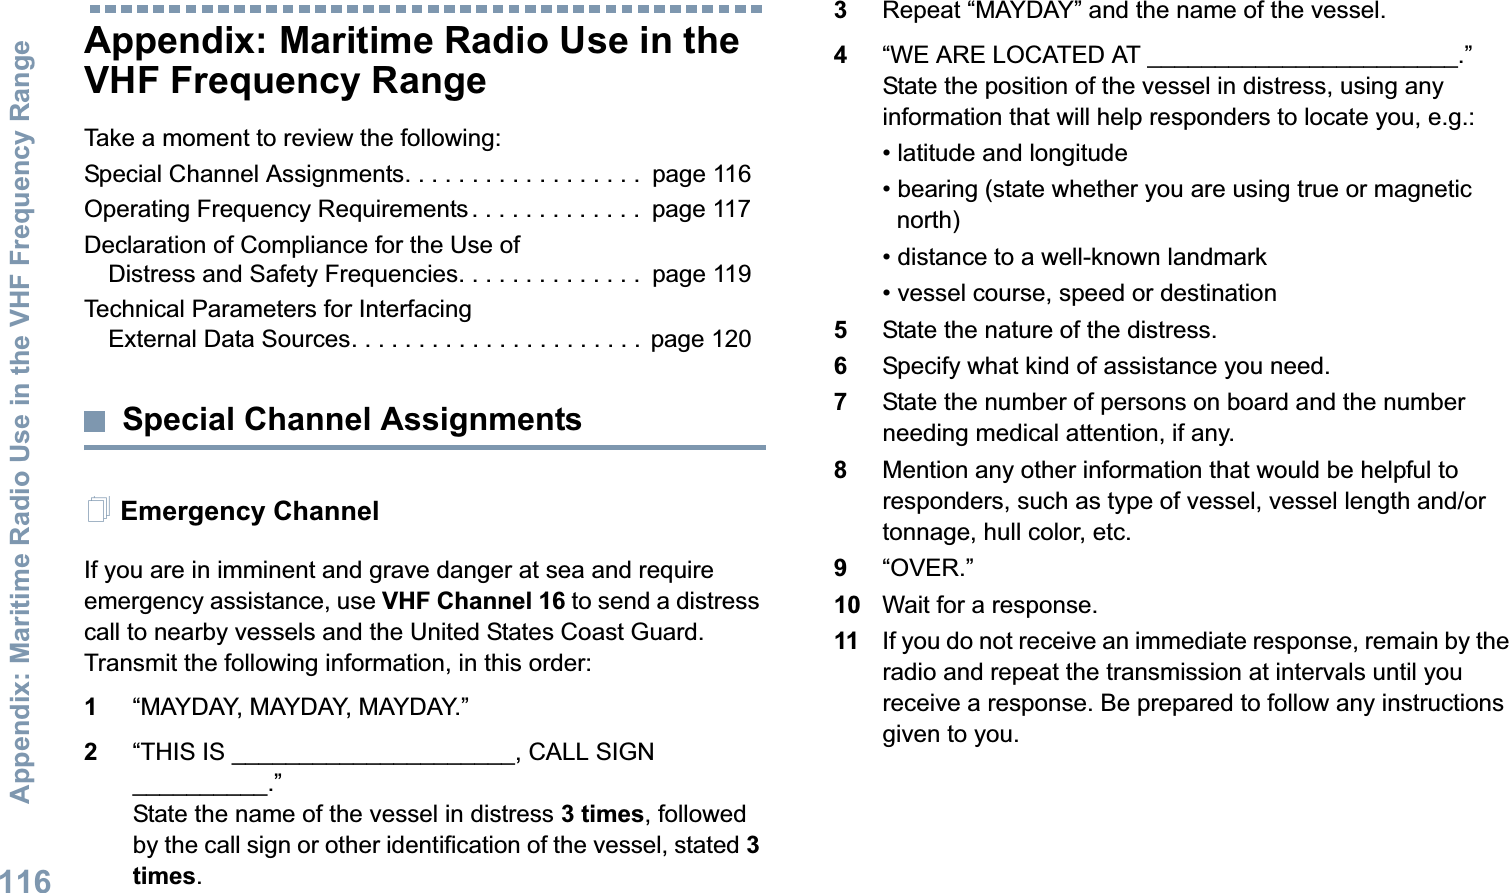 Appendix: Maritime Radio Use in the VHF Frequency RangeEnglish116Appendix: Maritime Radio Use in the VHF Frequency RangeTake a moment to review the following:Special Channel Assignments. . . . . . . . . . . . . . . . . .  page 116Operating Frequency Requirements. . . . . . . . . . . . .  page 117Declaration of Compliance for the Use of Distress and Safety Frequencies. . . . . . . . . . . . . .  page 119Technical Parameters for InterfacingExternal Data Sources. . . . . . . . . . . . . . . . . . . . . . page 120Special Channel AssignmentsEmergency ChannelIf you are in imminent and grave danger at sea and require emergency assistance, use VHF Channel 16 to send a distress call to nearby vessels and the United States Coast Guard. Transmit the following information, in this order:1“MAYDAY, MAYDAY, MAYDAY.”2“THIS IS _____________________, CALL SIGN __________.”State the name of the vessel in distress 3 times, followed by the call sign or other identification of the vessel, stated 3 times.3Repeat “MAYDAY” and the name of the vessel.4“WE ARE LOCATED AT _______________________.” State the position of the vessel in distress, using any information that will help responders to locate you, e.g.:• latitude and longitude• bearing (state whether you are using true or magnetic north)• distance to a well-known landmark• vessel course, speed or destination5State the nature of the distress.6Specify what kind of assistance you need.7State the number of persons on board and the number needing medical attention, if any.8Mention any other information that would be helpful to responders, such as type of vessel, vessel length and/or tonnage, hull color, etc.9“OVER.”10 Wait for a response.11 If you do not receive an immediate response, remain by the radio and repeat the transmission at intervals until you receive a response. Be prepared to follow any instructions given to you.